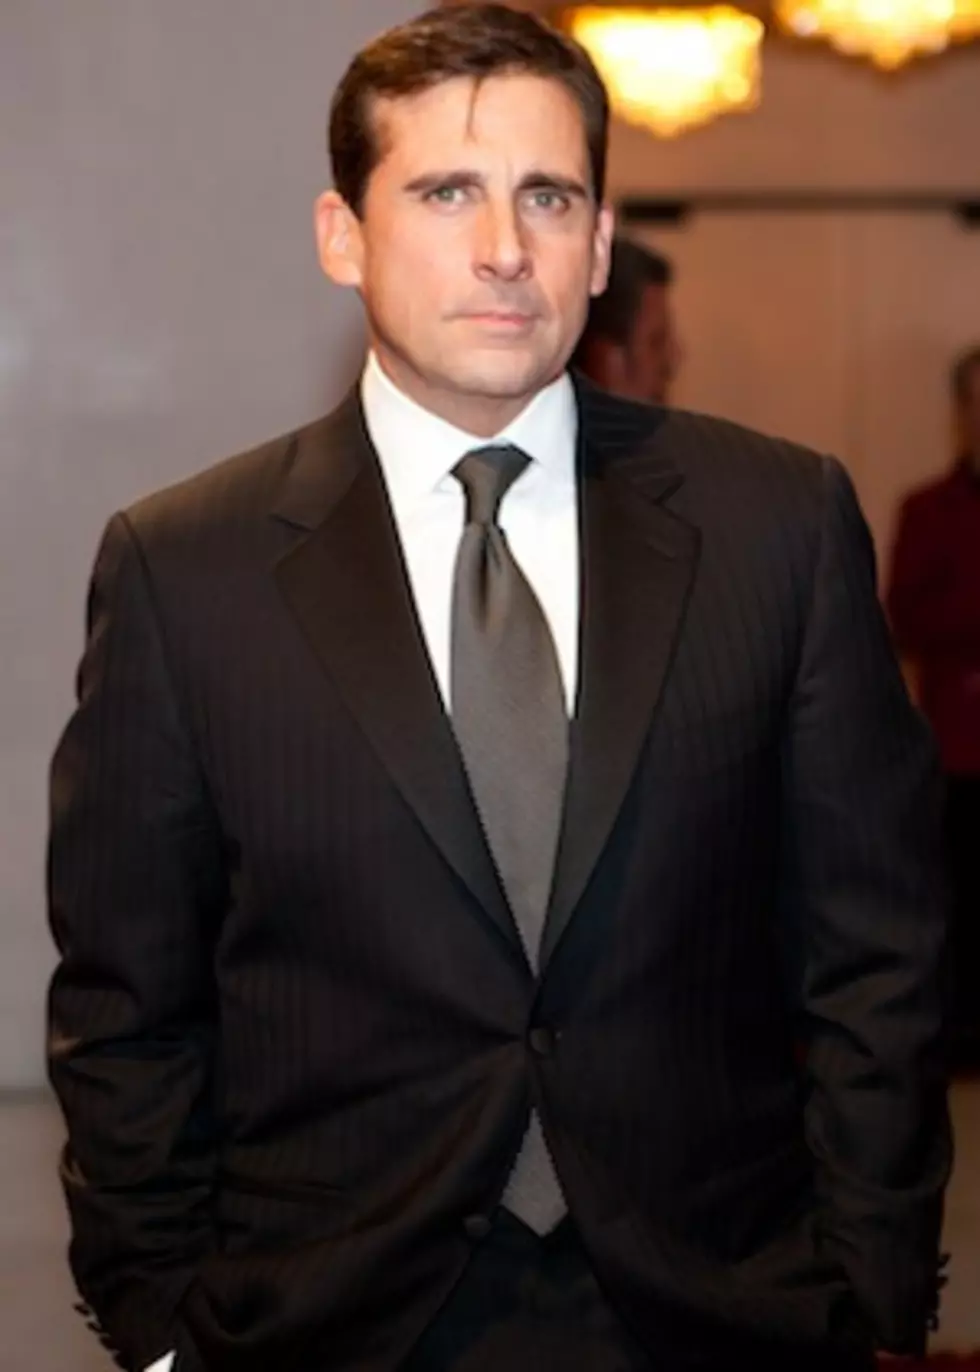 Steve Carell &#8211; Celebrities Who Turned 50 in 2012